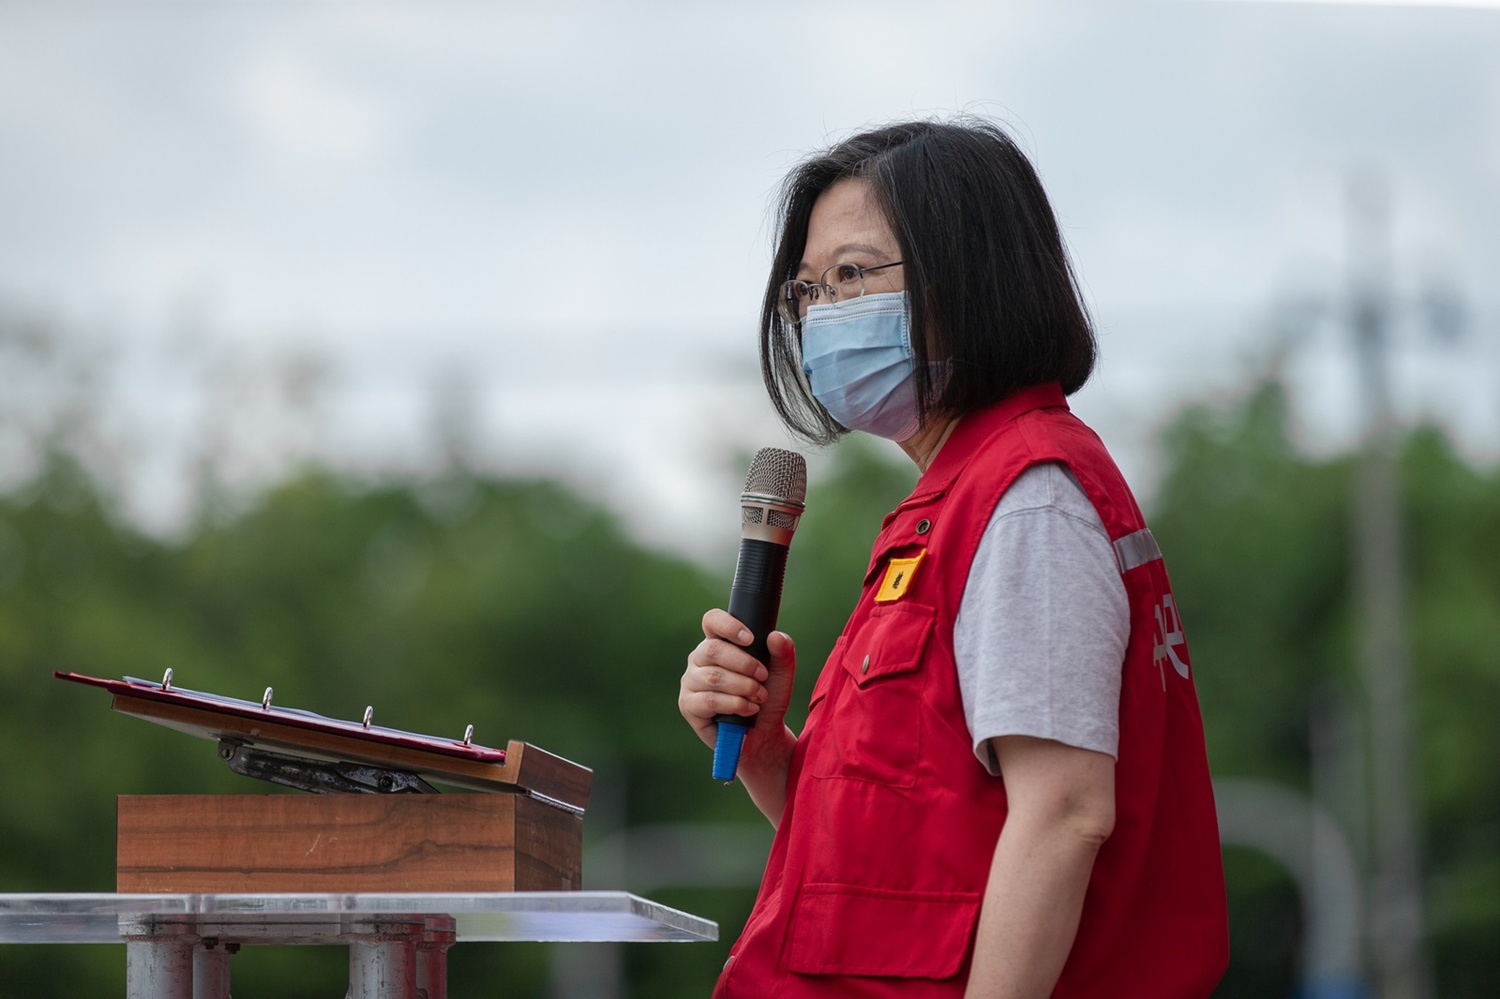 Tsai said Taiwan has turned the lessons learned from the earthquake into improvements in disaster prevention, including the development of better infrastructure and technology. (Photo / Provided by the Office of the President)